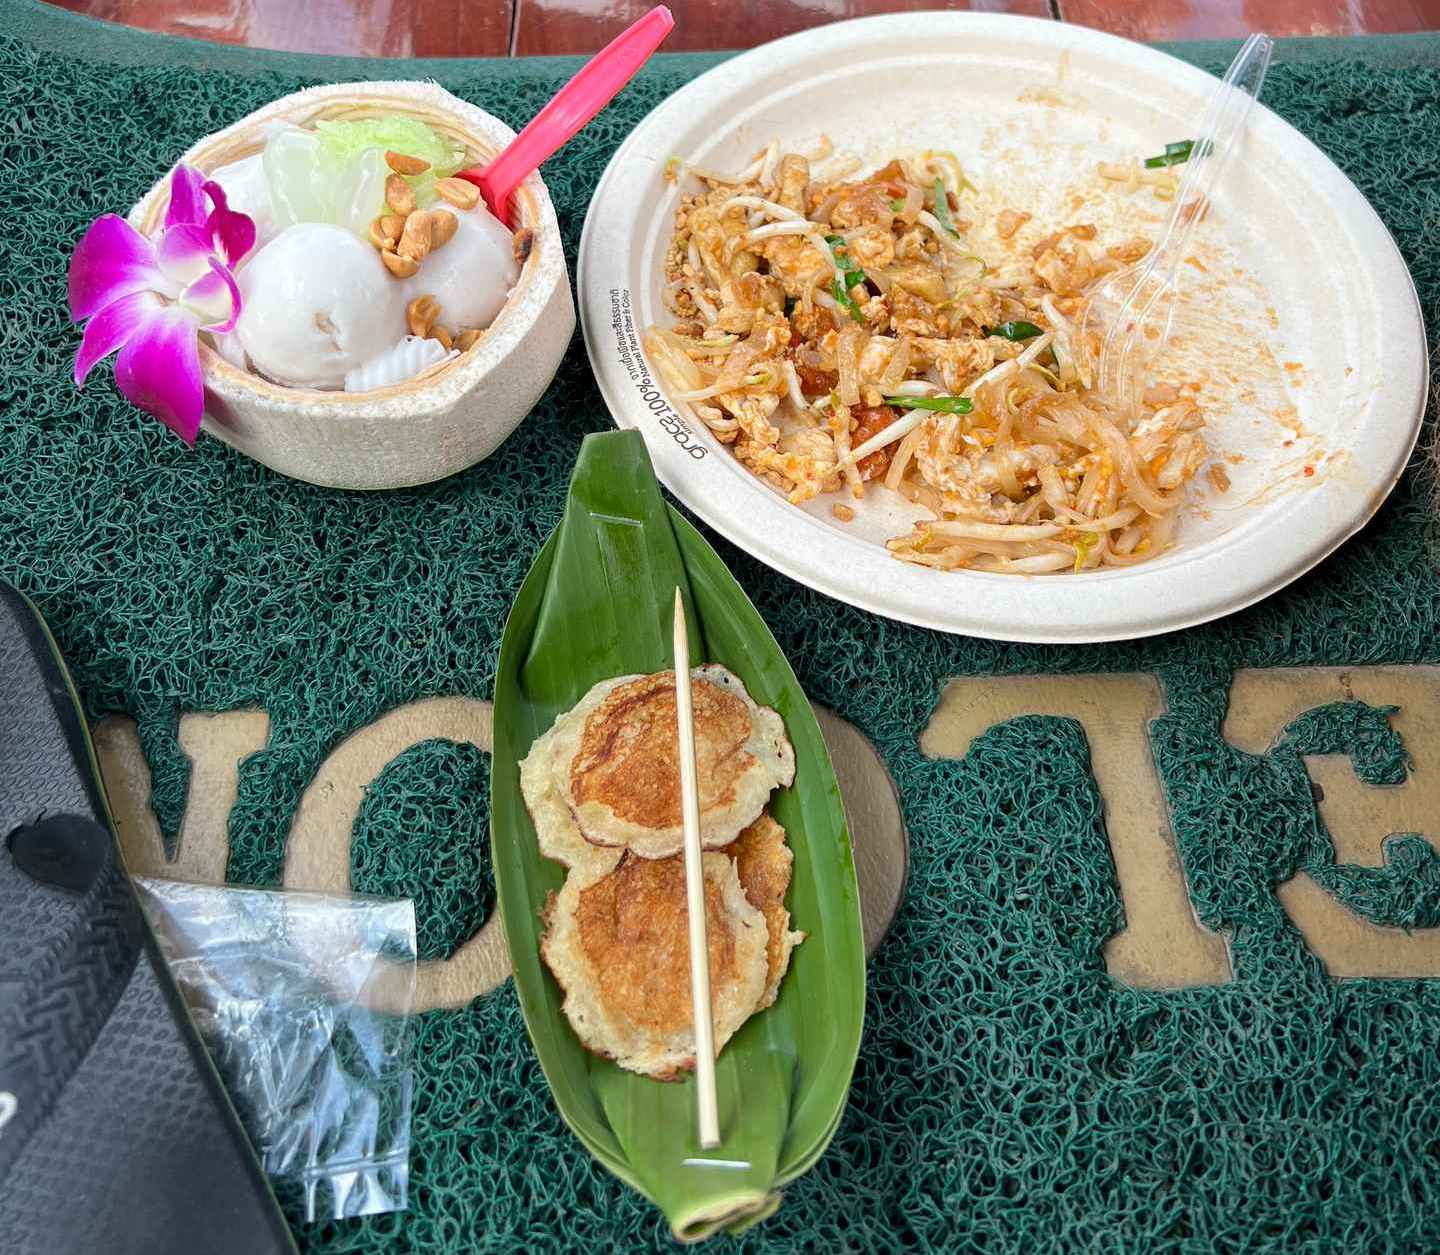 Coconut pancakes, noodles and ice cream at Damnoen Saduak Floating Market in Thailand. Shotguns, markets and temples in Bangkok